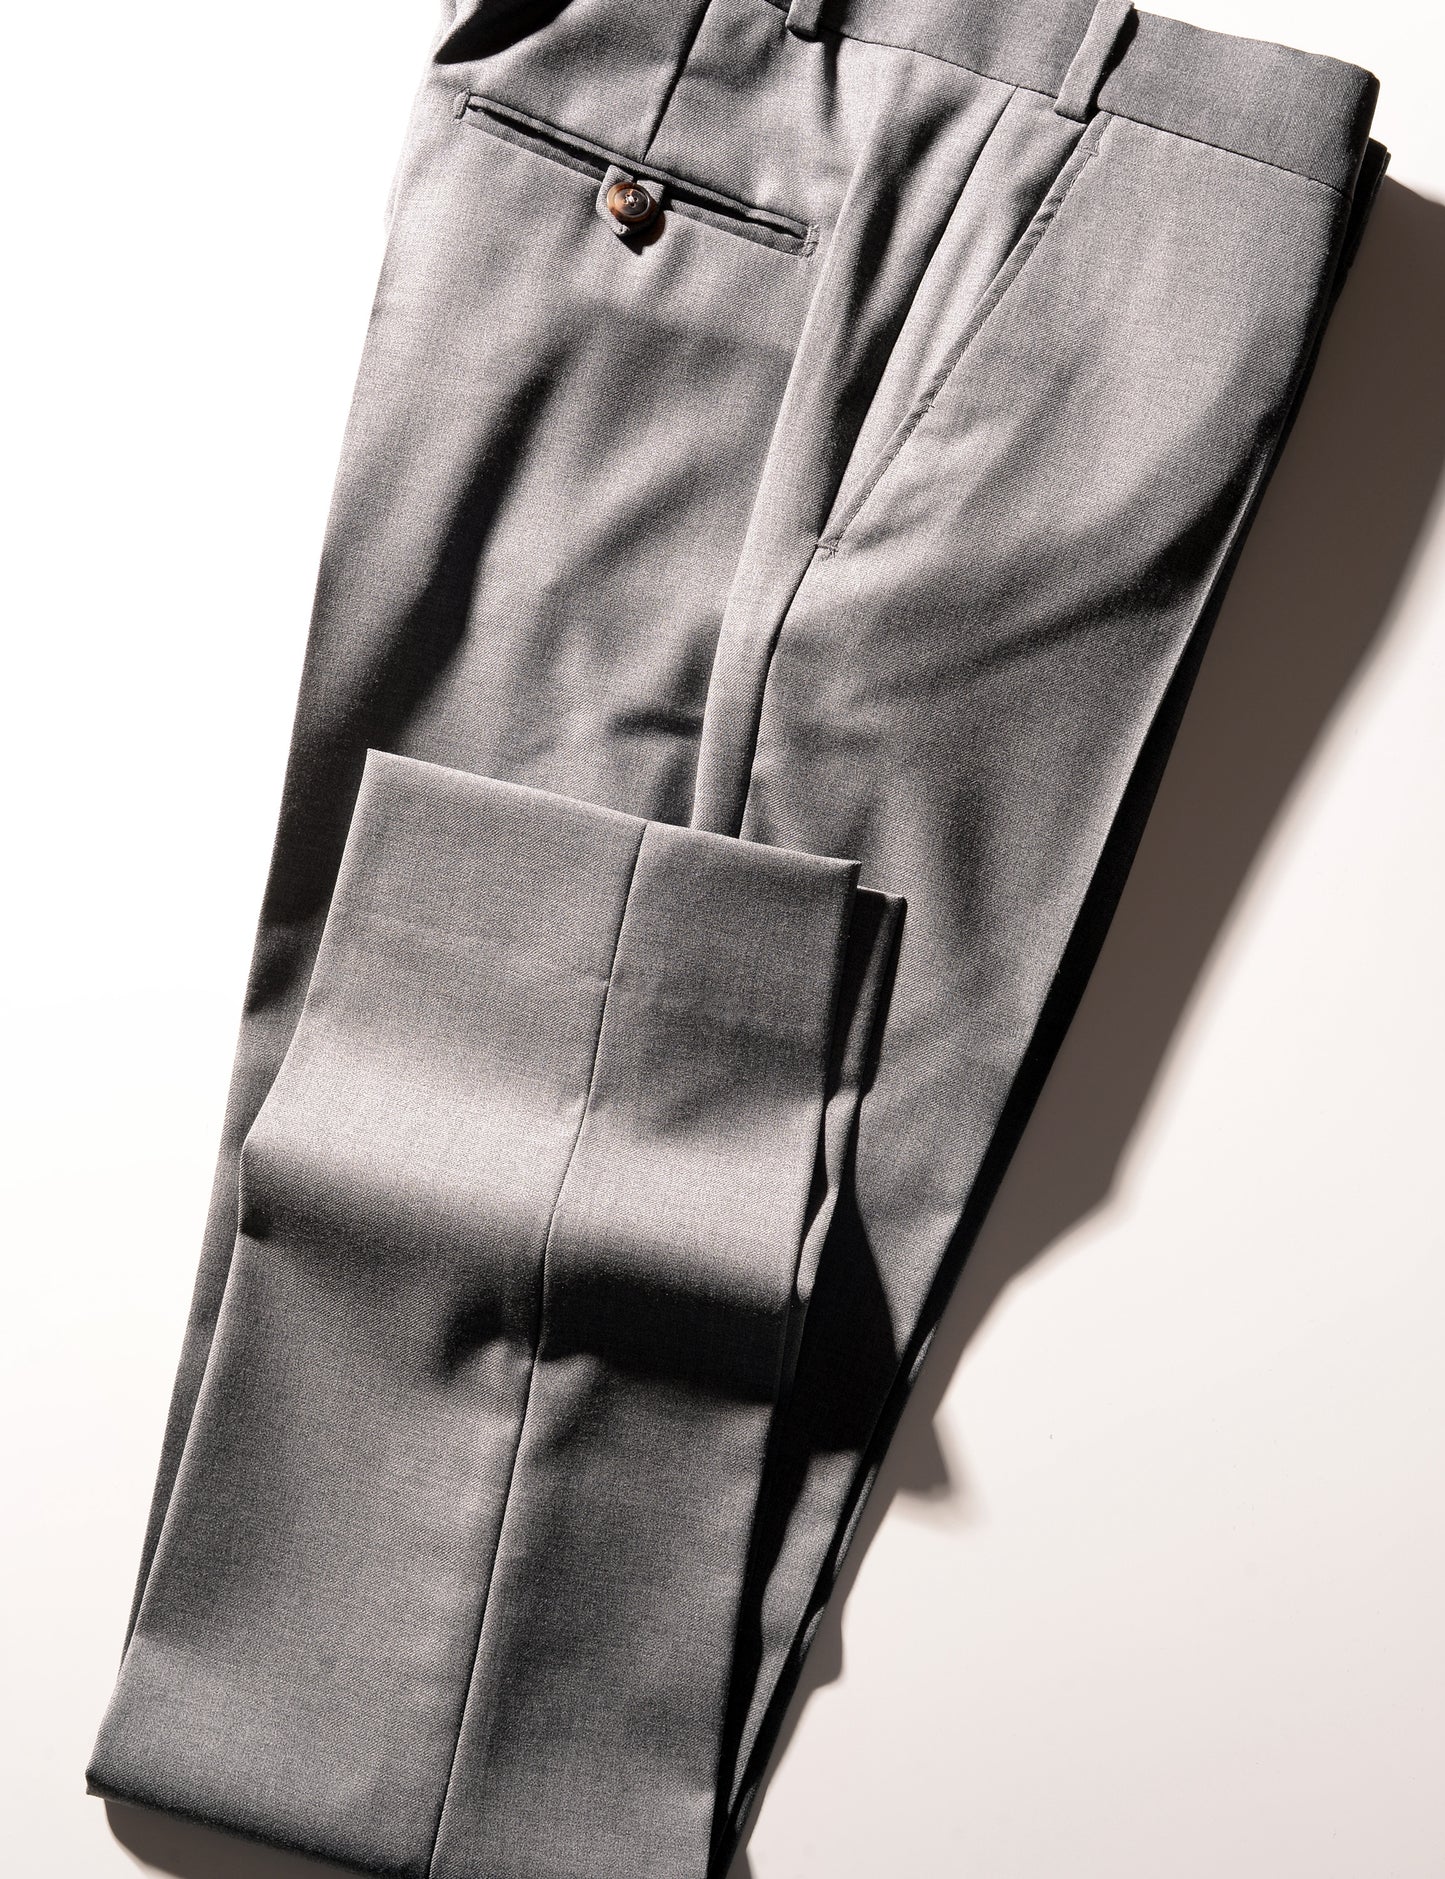 Detail shot of Brooklyn Tailors BKT50 Tailored Trouser in Super 110s Twill - Dove Gray showing hem, side pocket, back pocket, and waistband